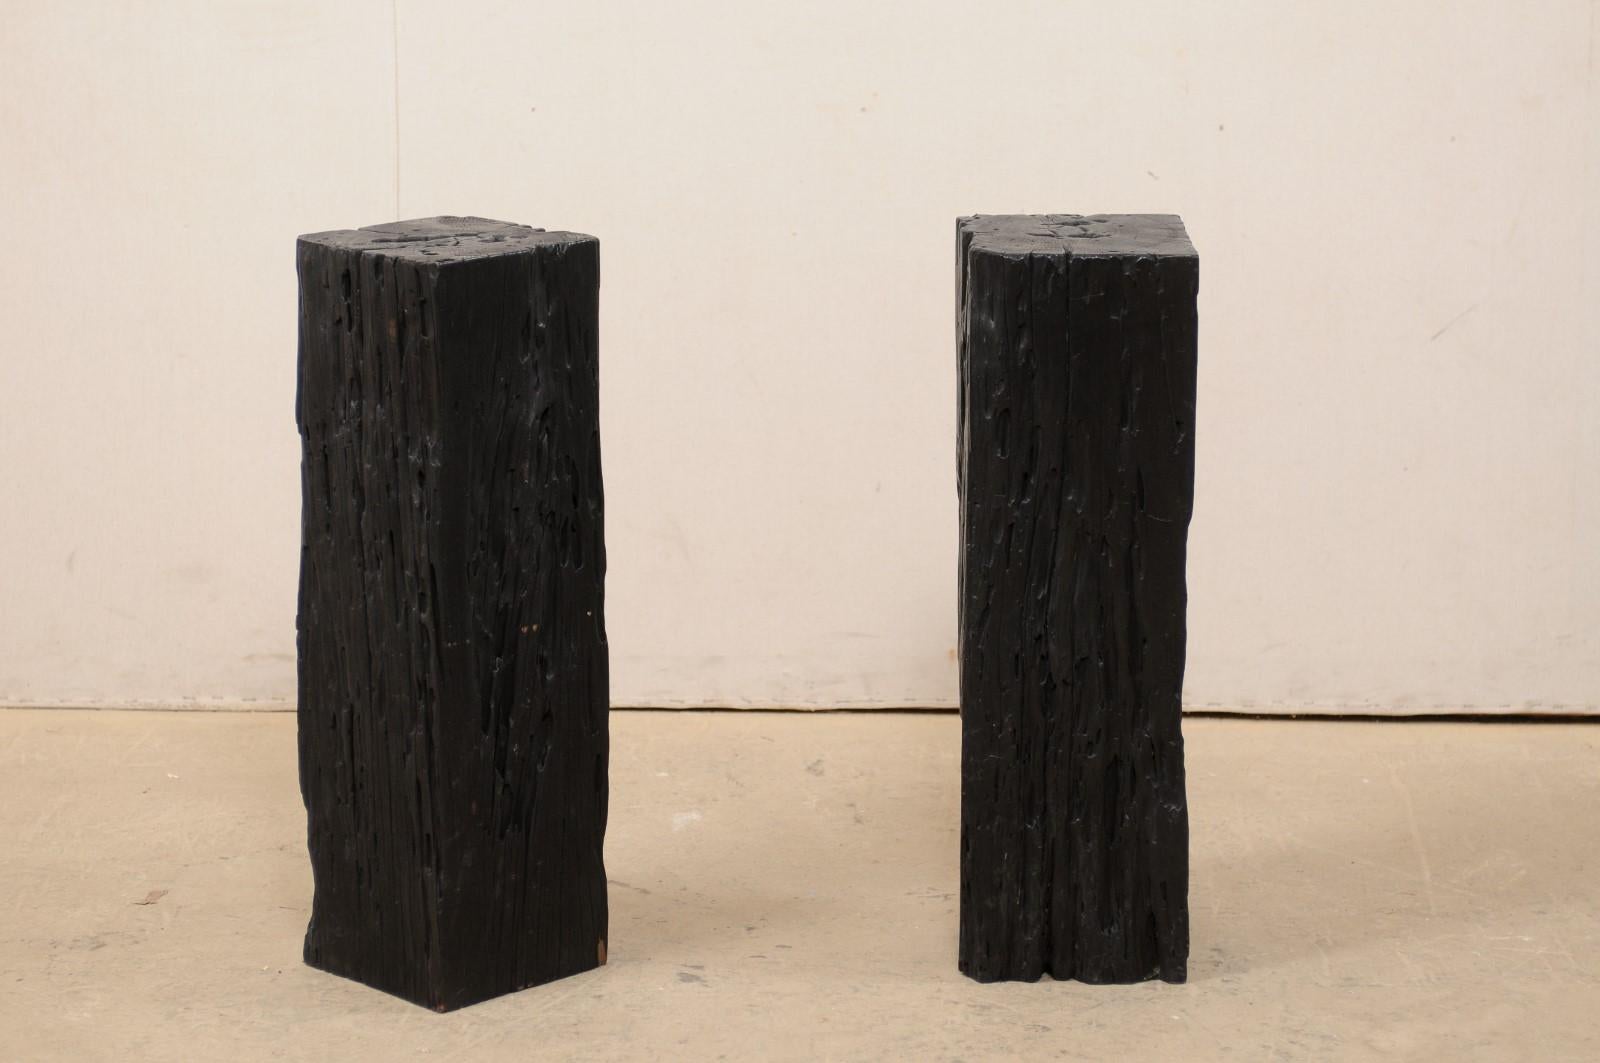 A pair of carbonized wood columns. This pair of unique pedestals, with squared bodies, have been created from old, reclaimed Merbau wood which has been carbonized, giving it a wonderful rich, black patina. The tops are primarily smooth and flat,